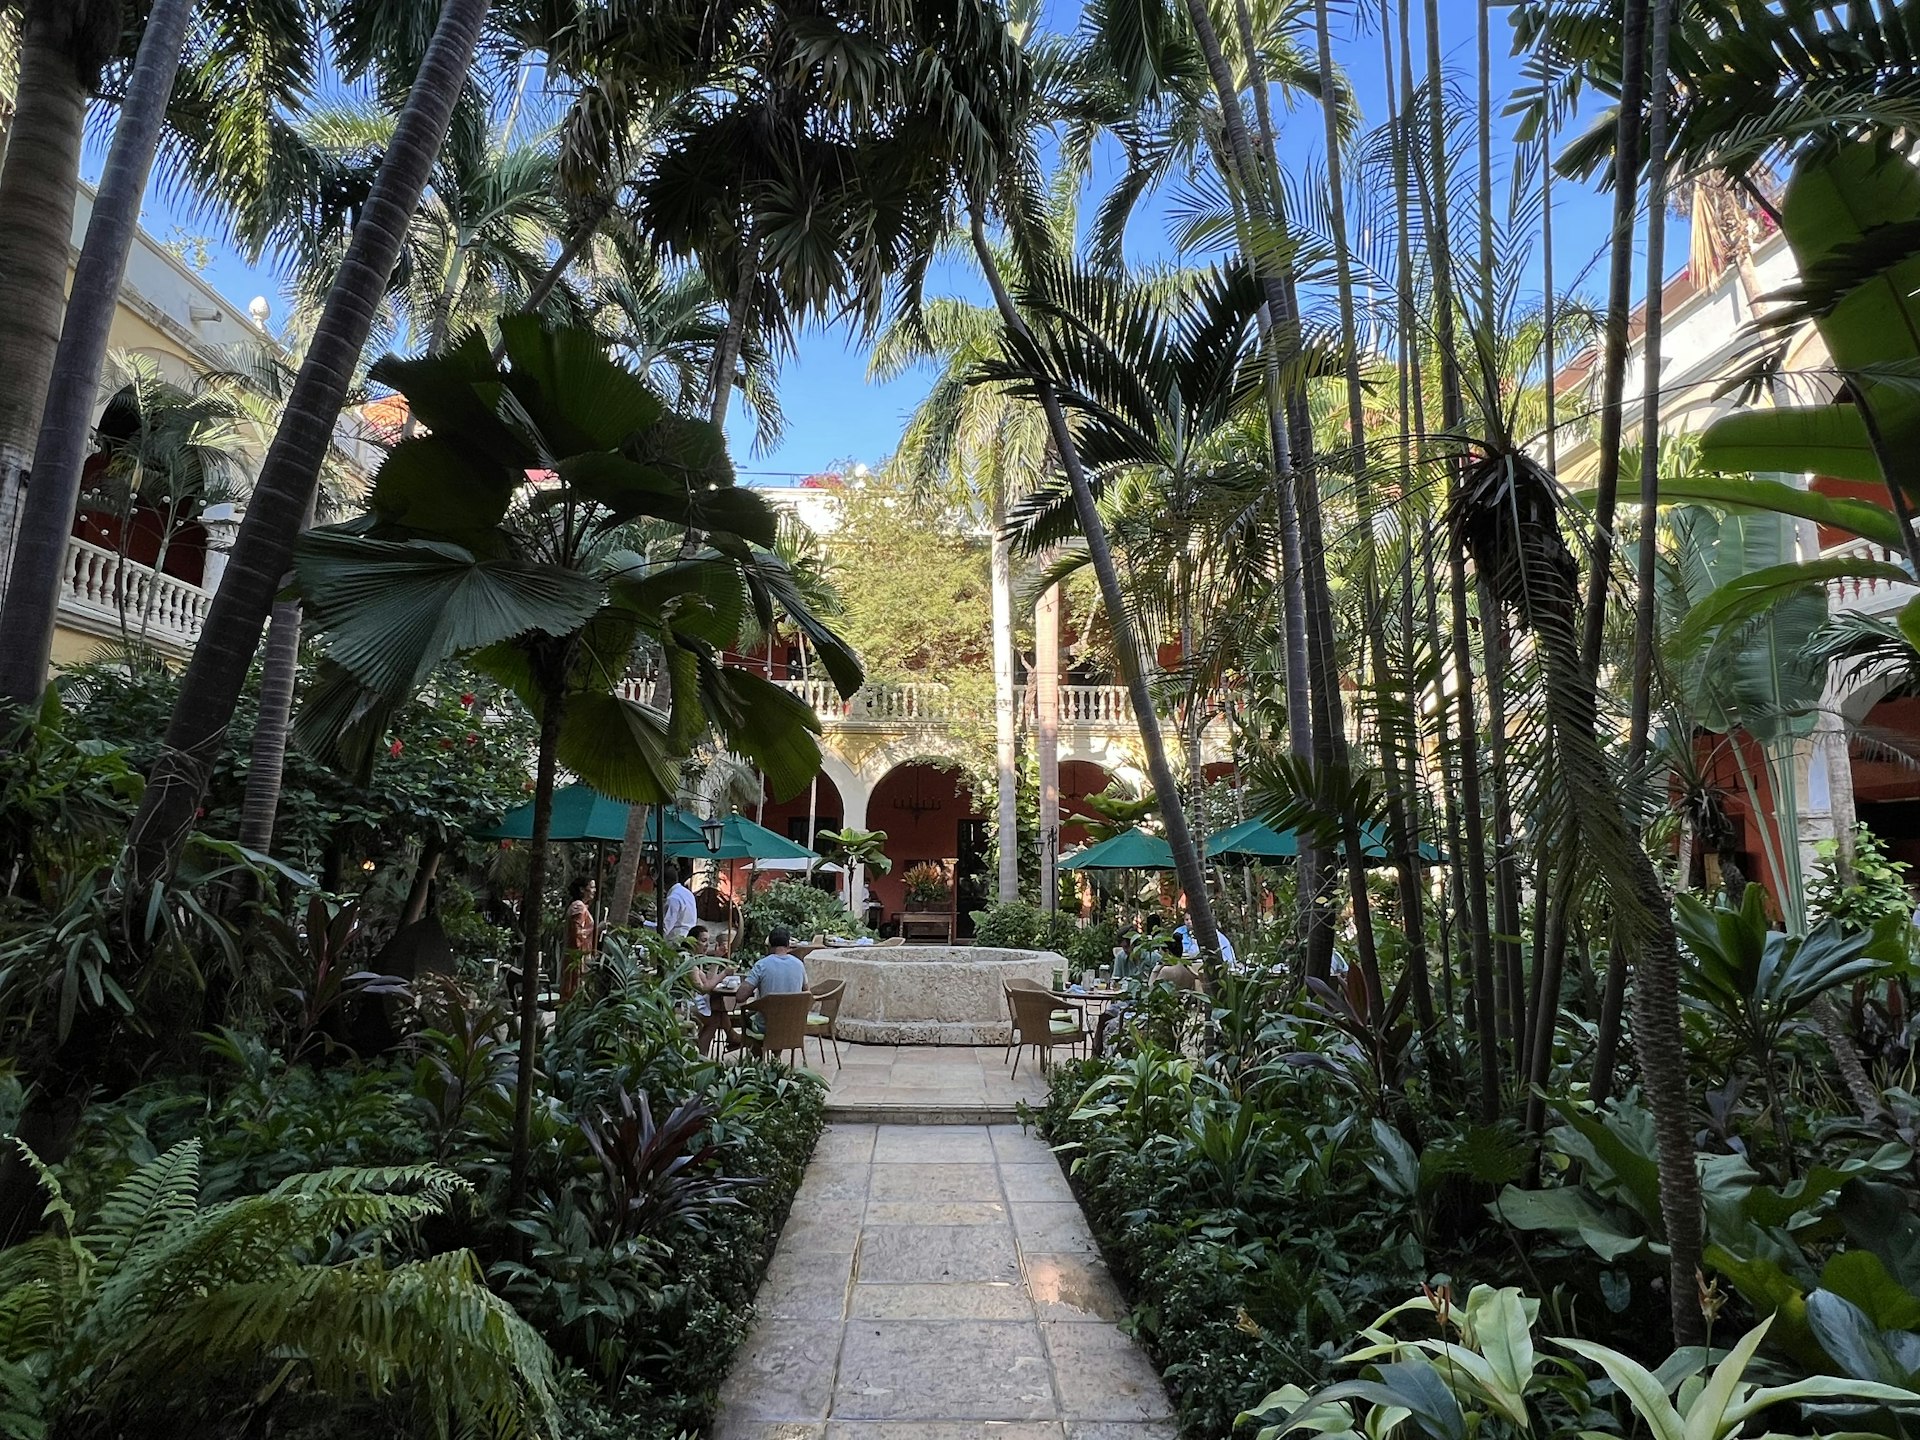 The hotel's Colonial-style courtyard garden